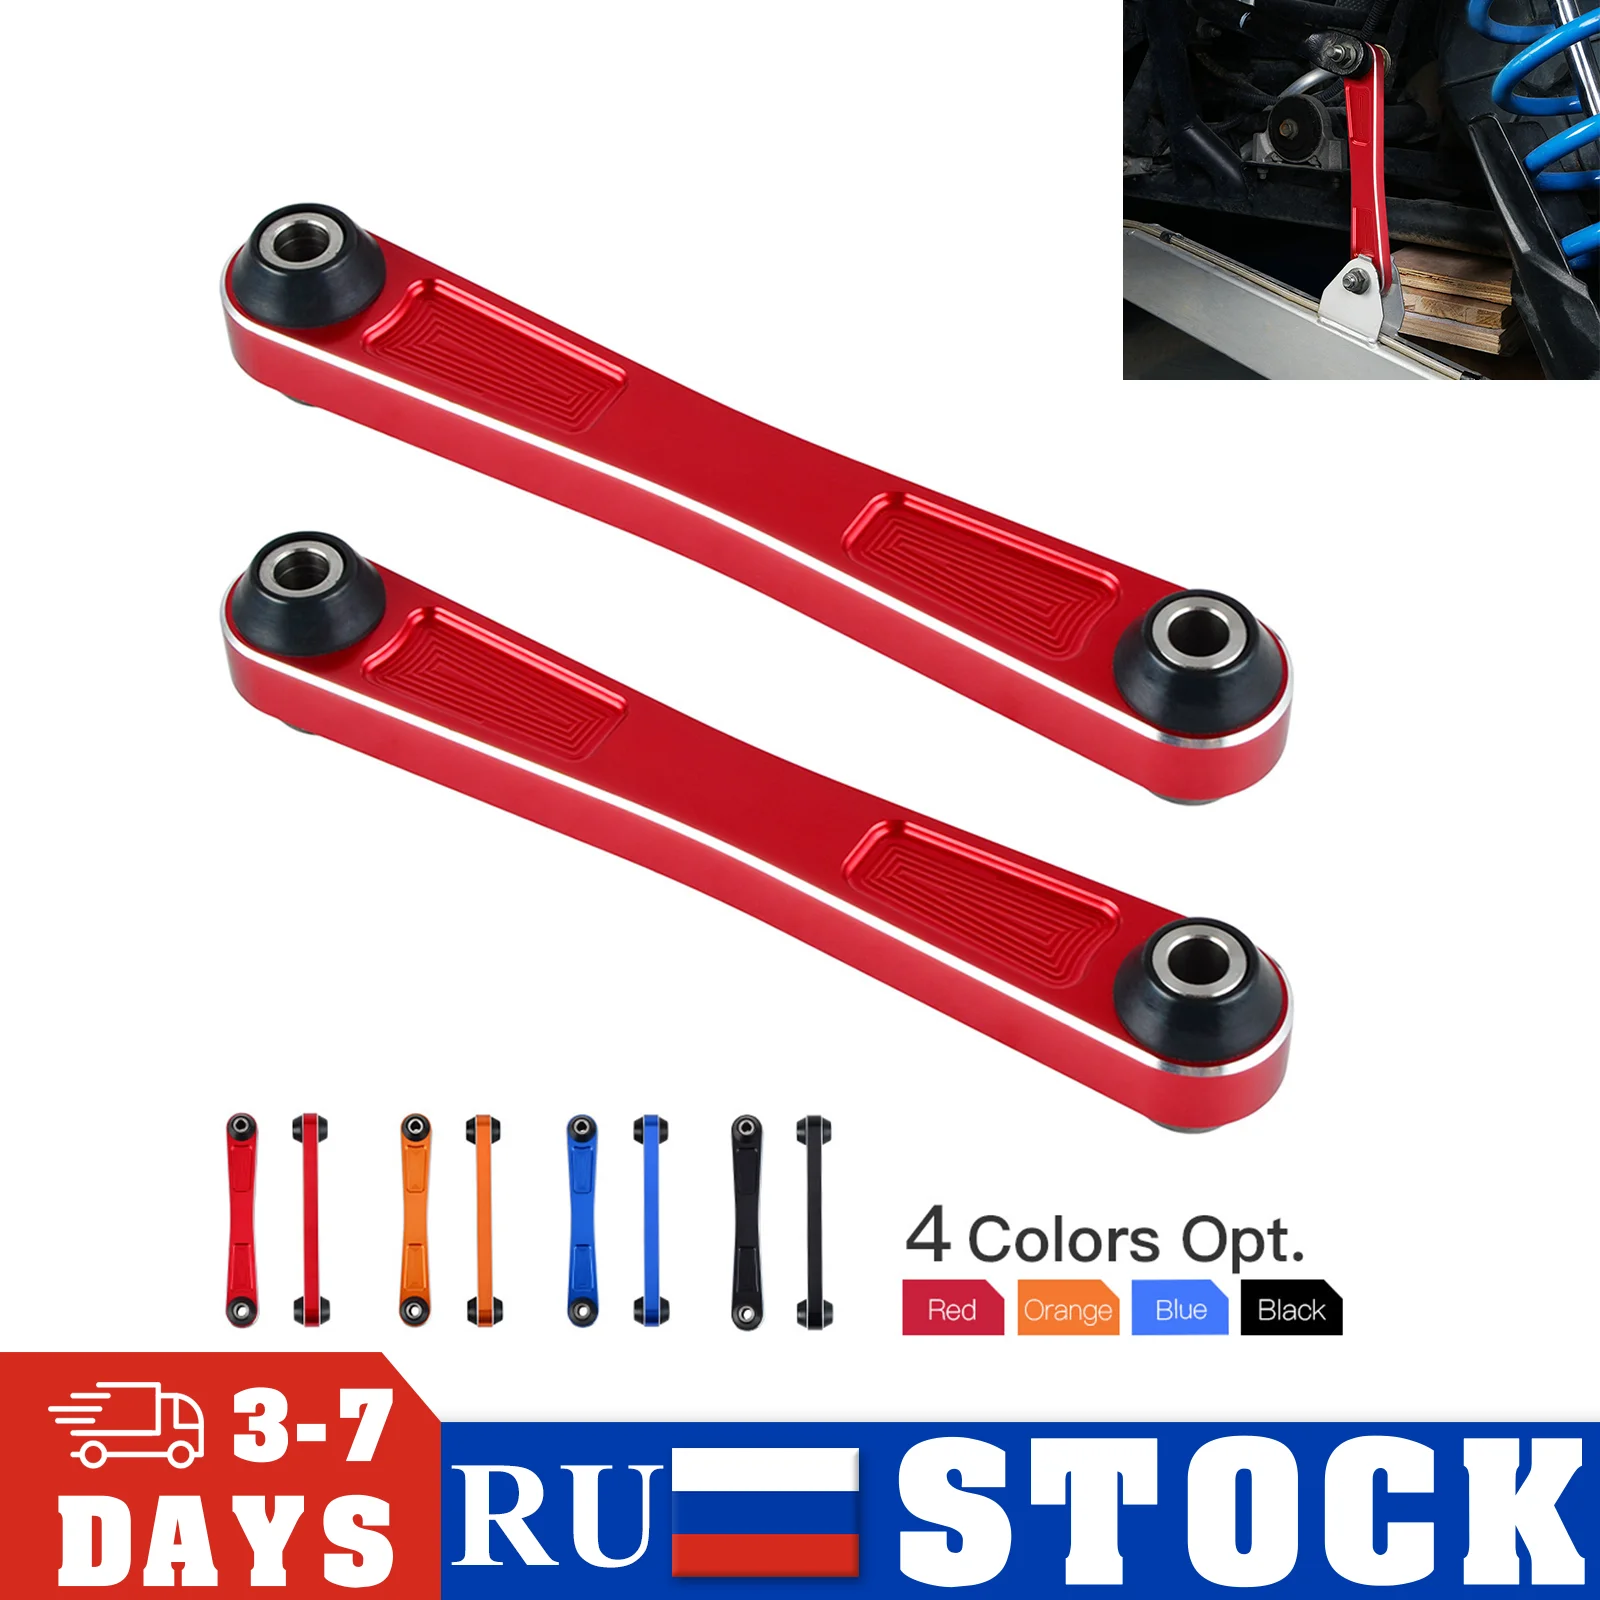 

For Polaris RZR 1000 UTV Sway Bar End Link Kit RZR1000 All Years 2018 2017 2016 2015 2014 2013 Rear Left Right Sway Bar End Link